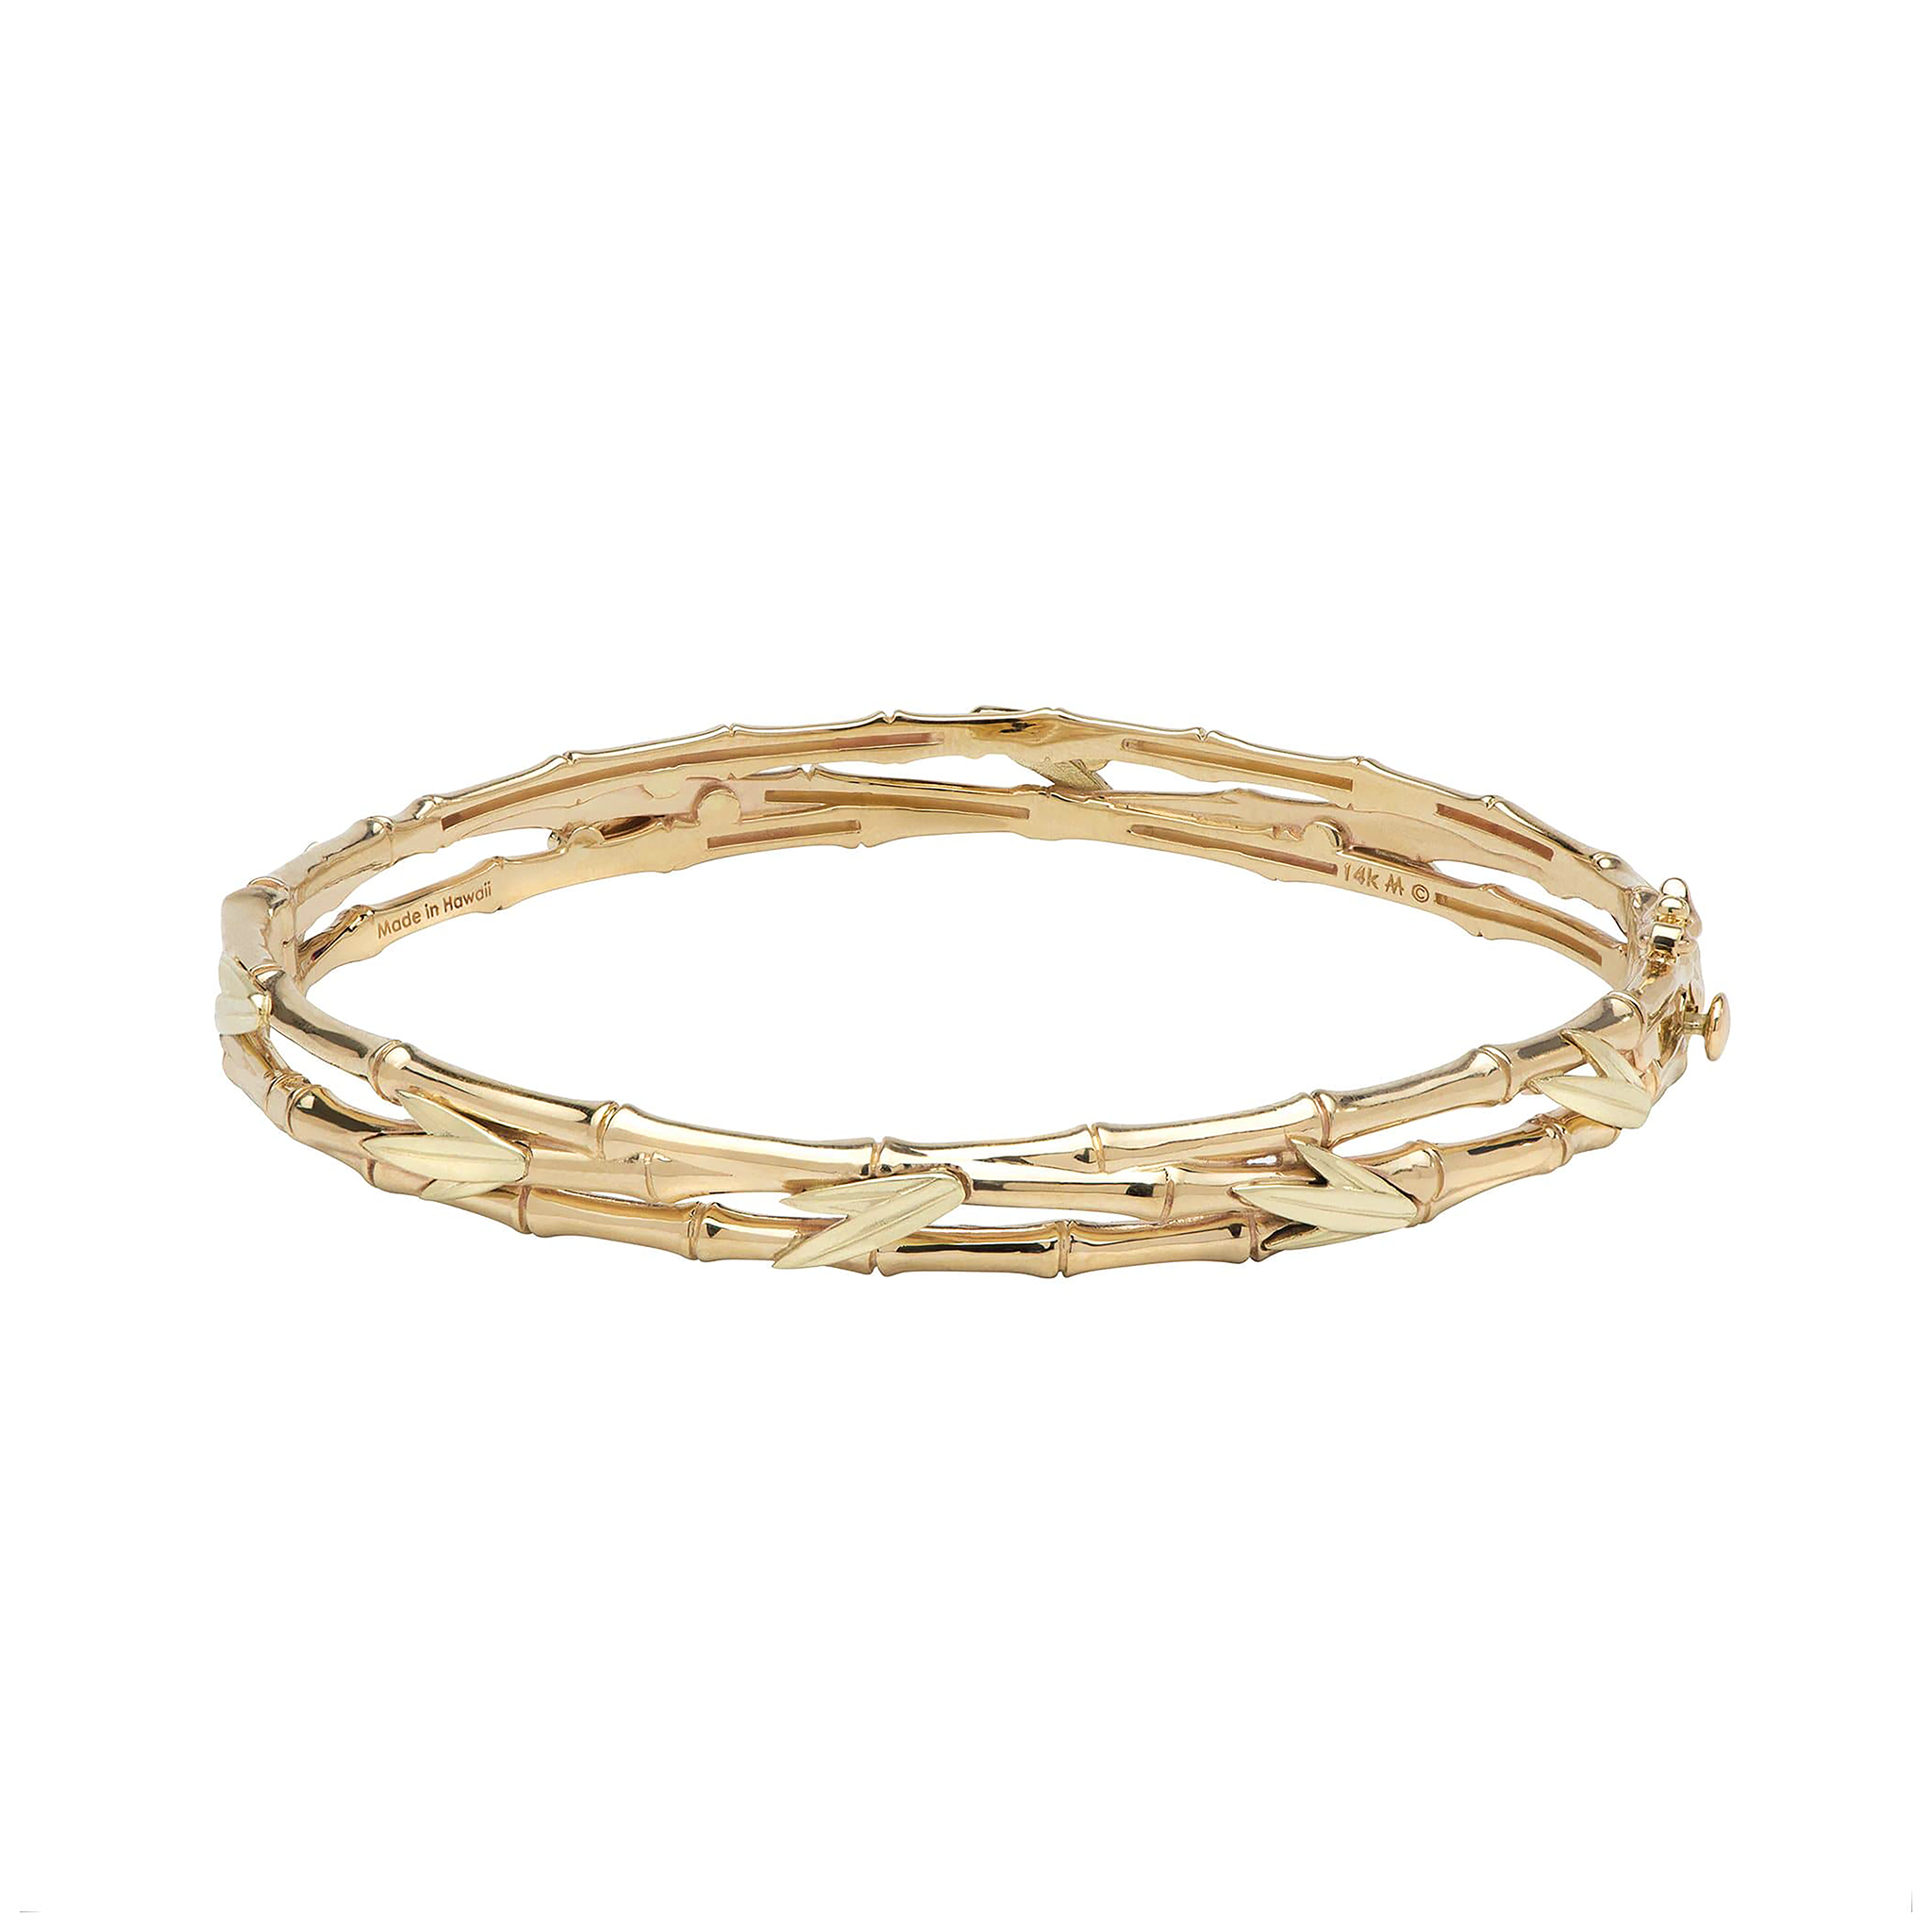 Bamboo Forest Bracelet in Two Tone Gold - 7mm